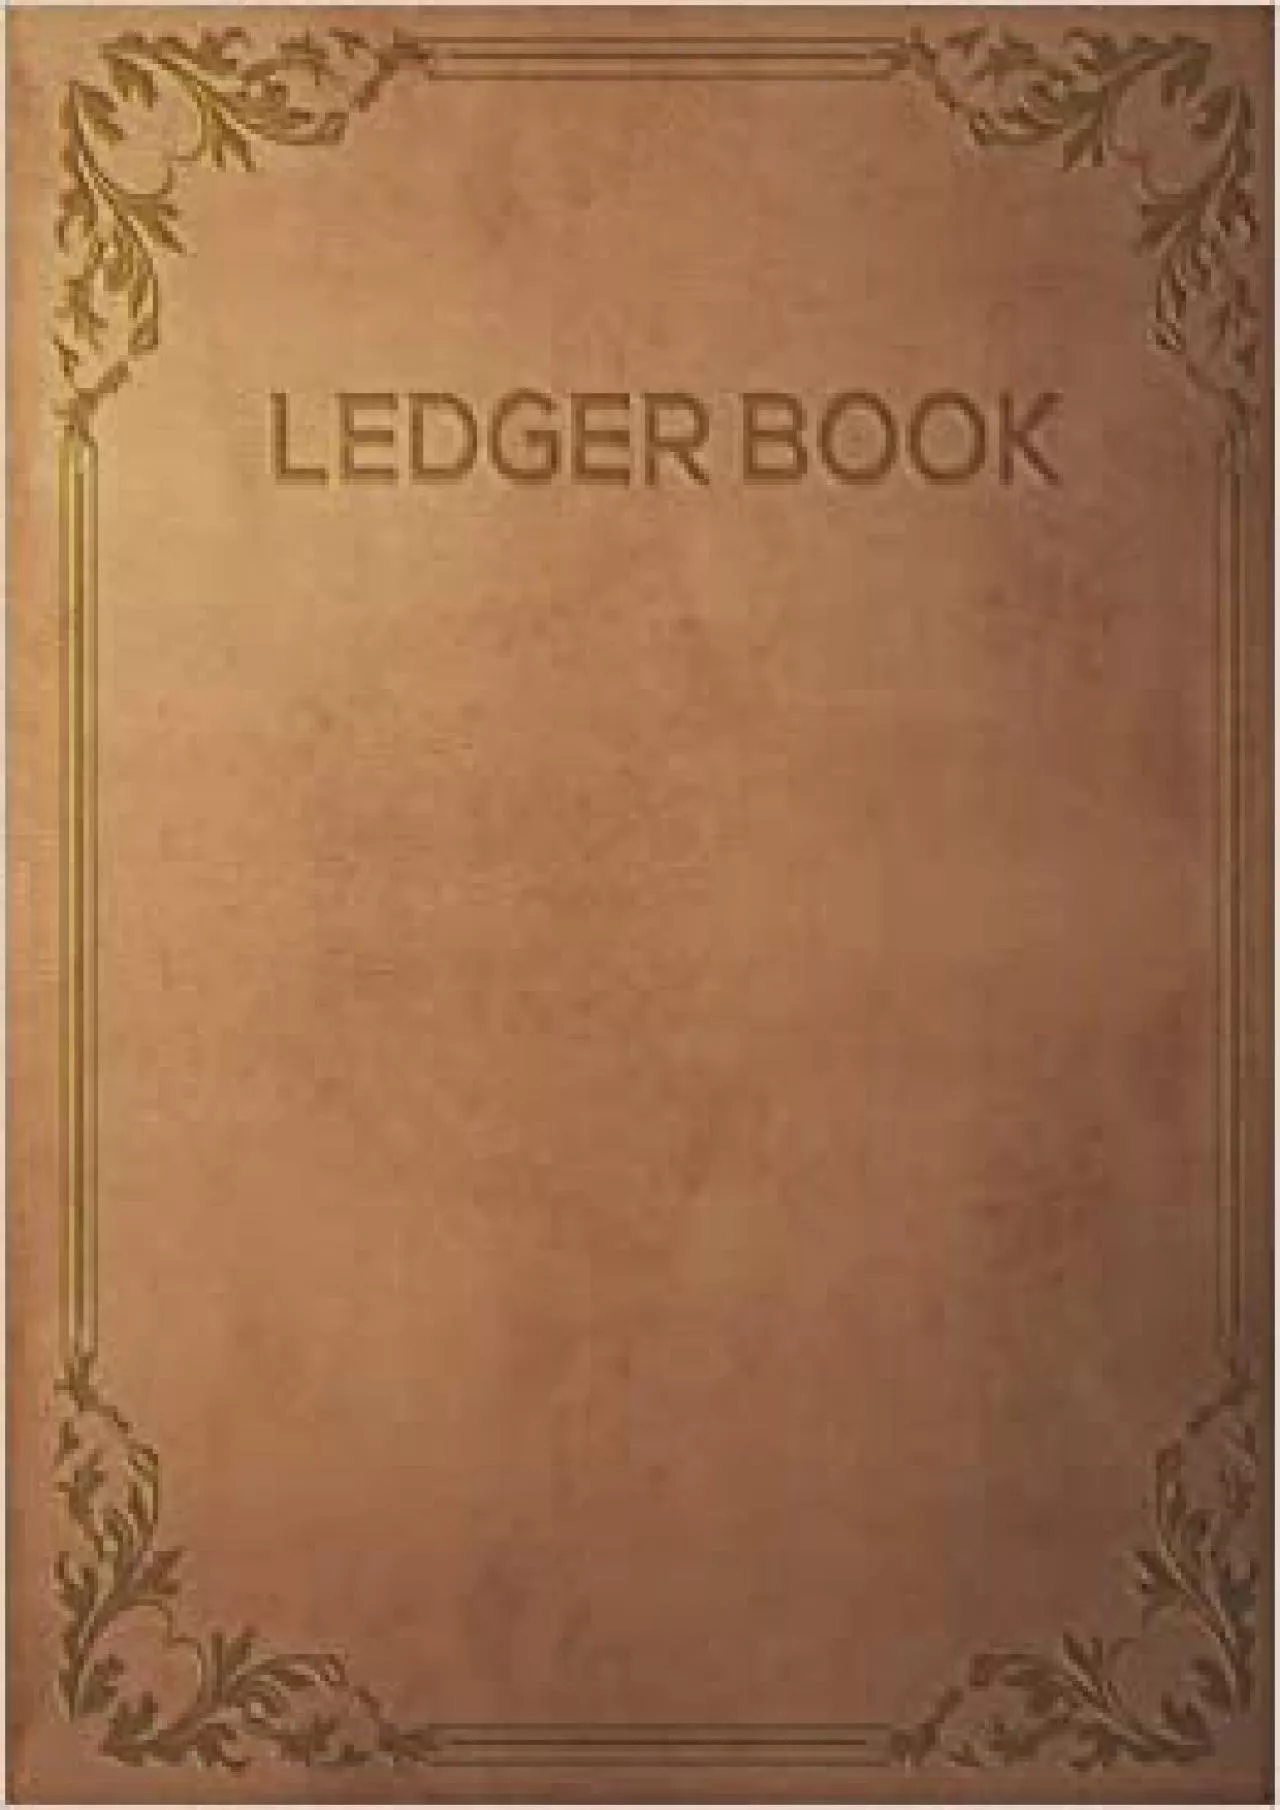 Ledger Book: Income and Expense Log Book For Small Business and Personal Finance (Leather